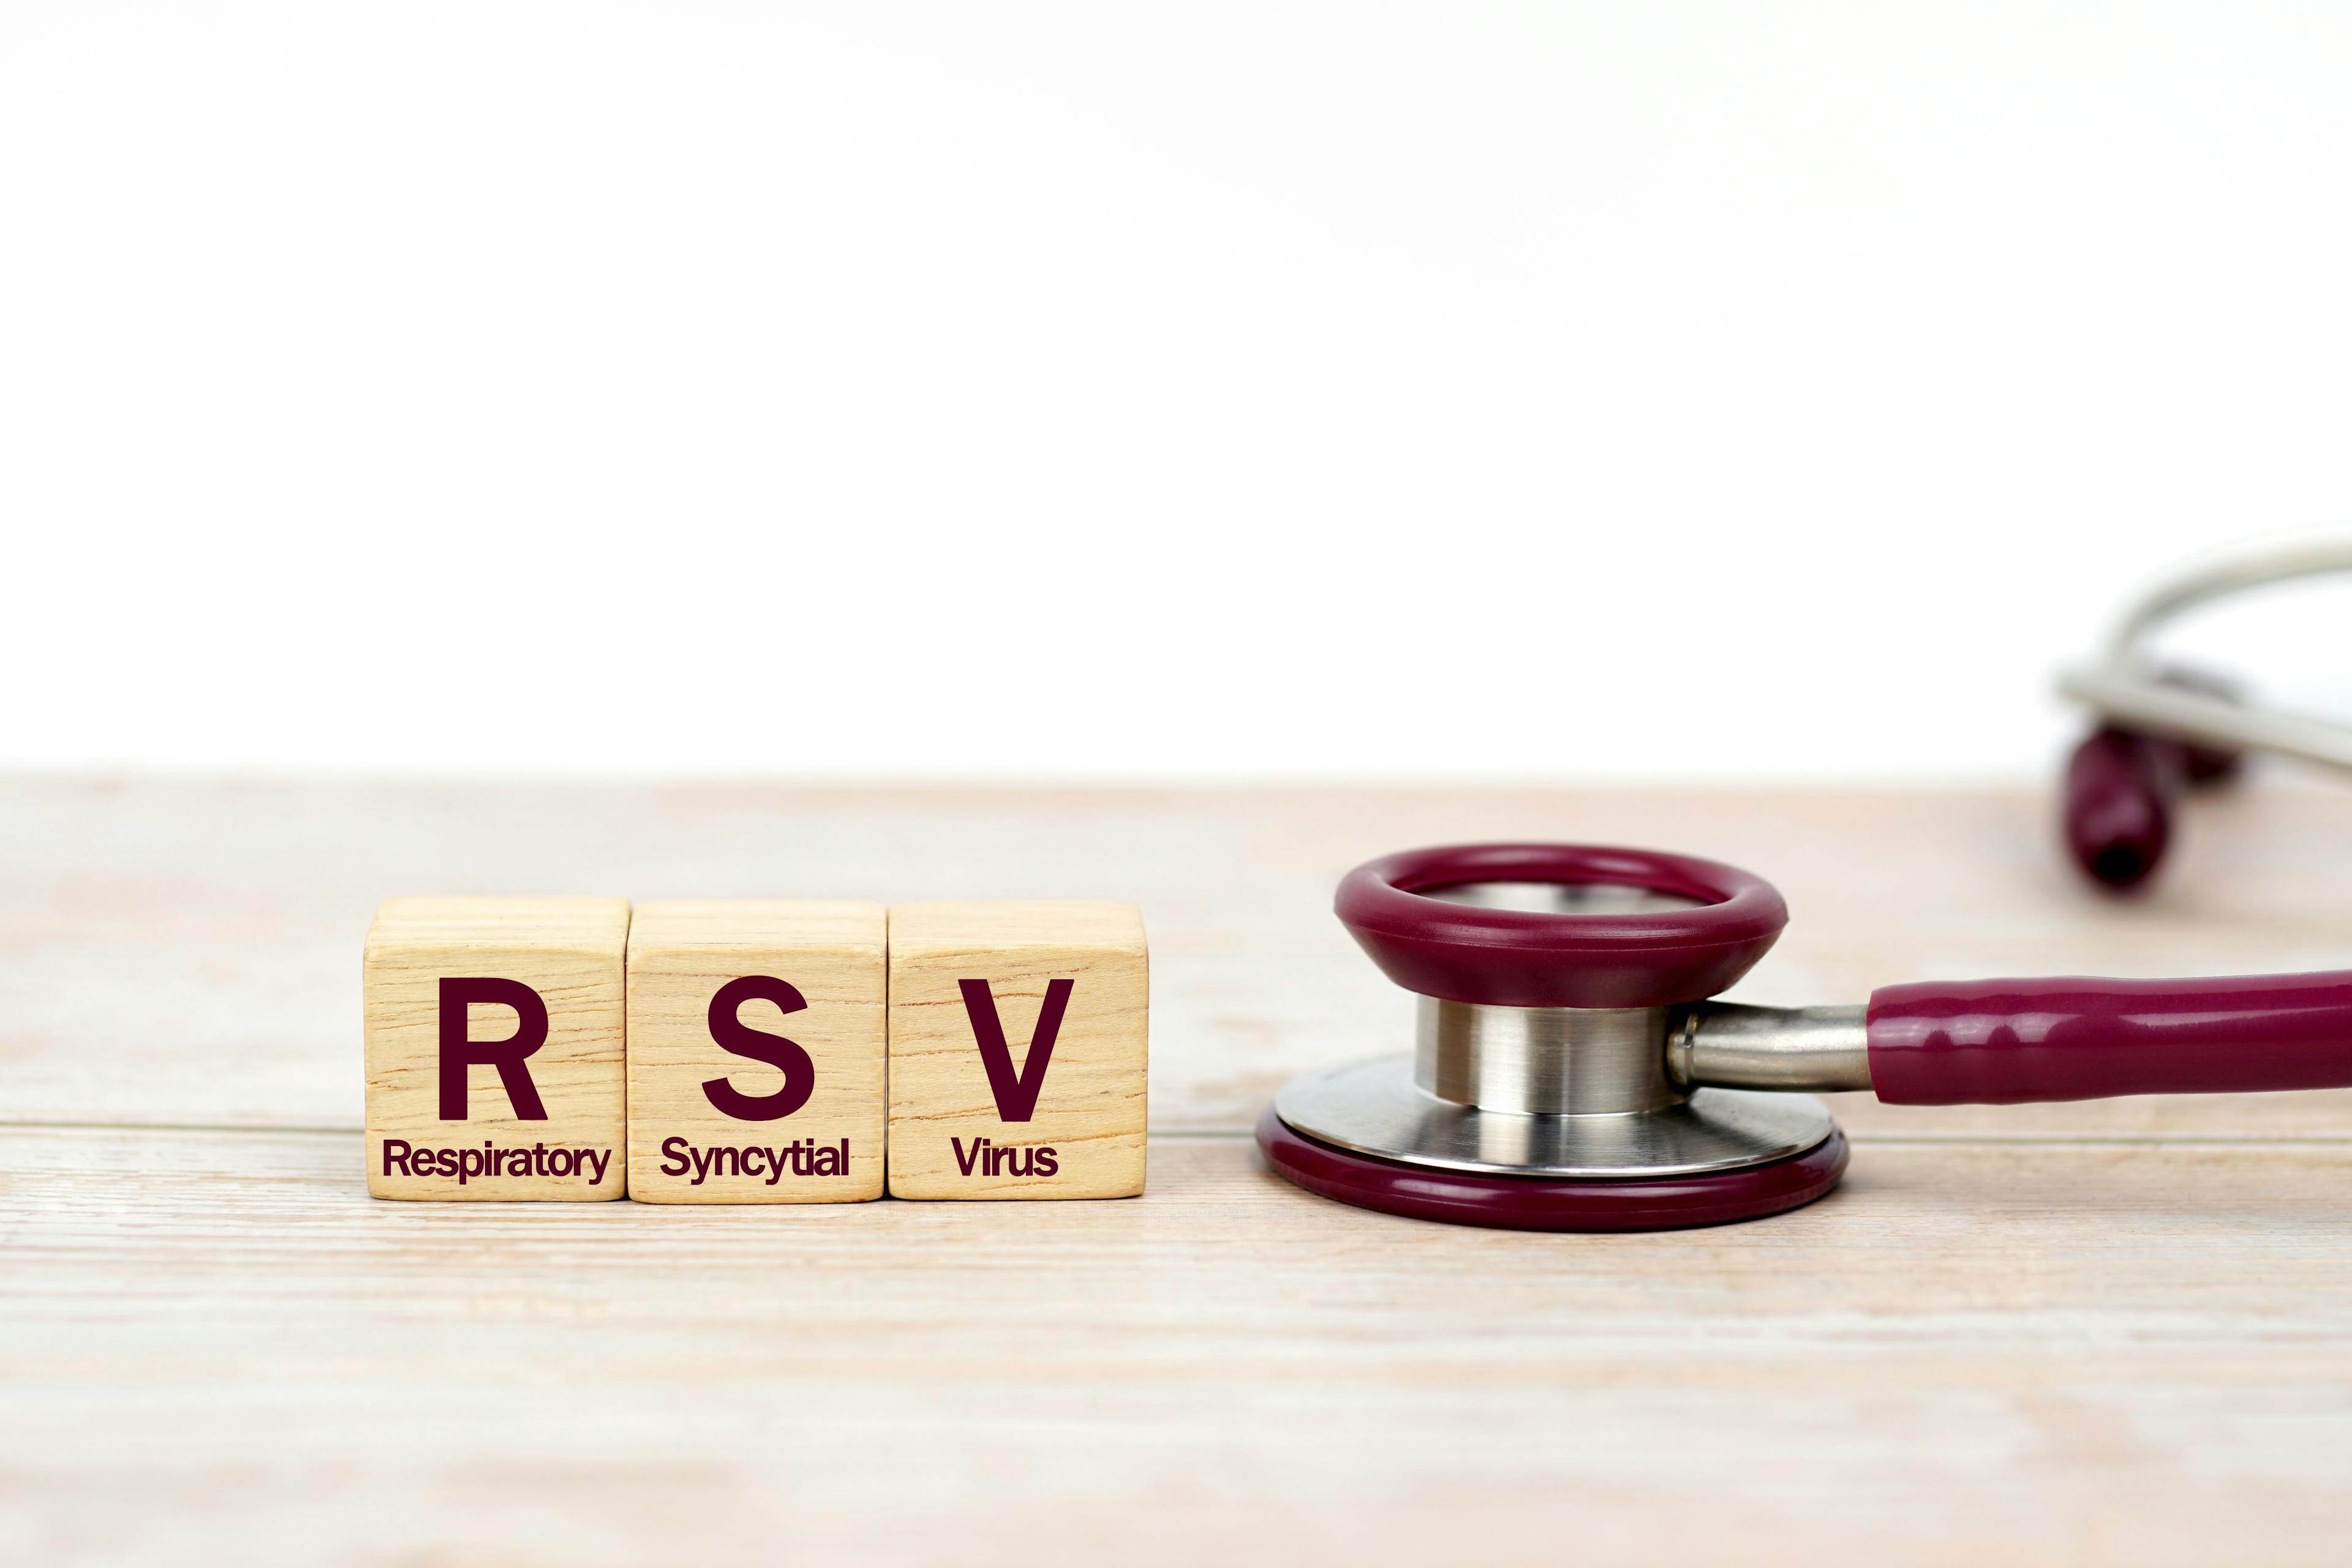 Monoclonal Antibody to Prevent RSV in Infants Shows Positives Results in Phase 2b/3 Study